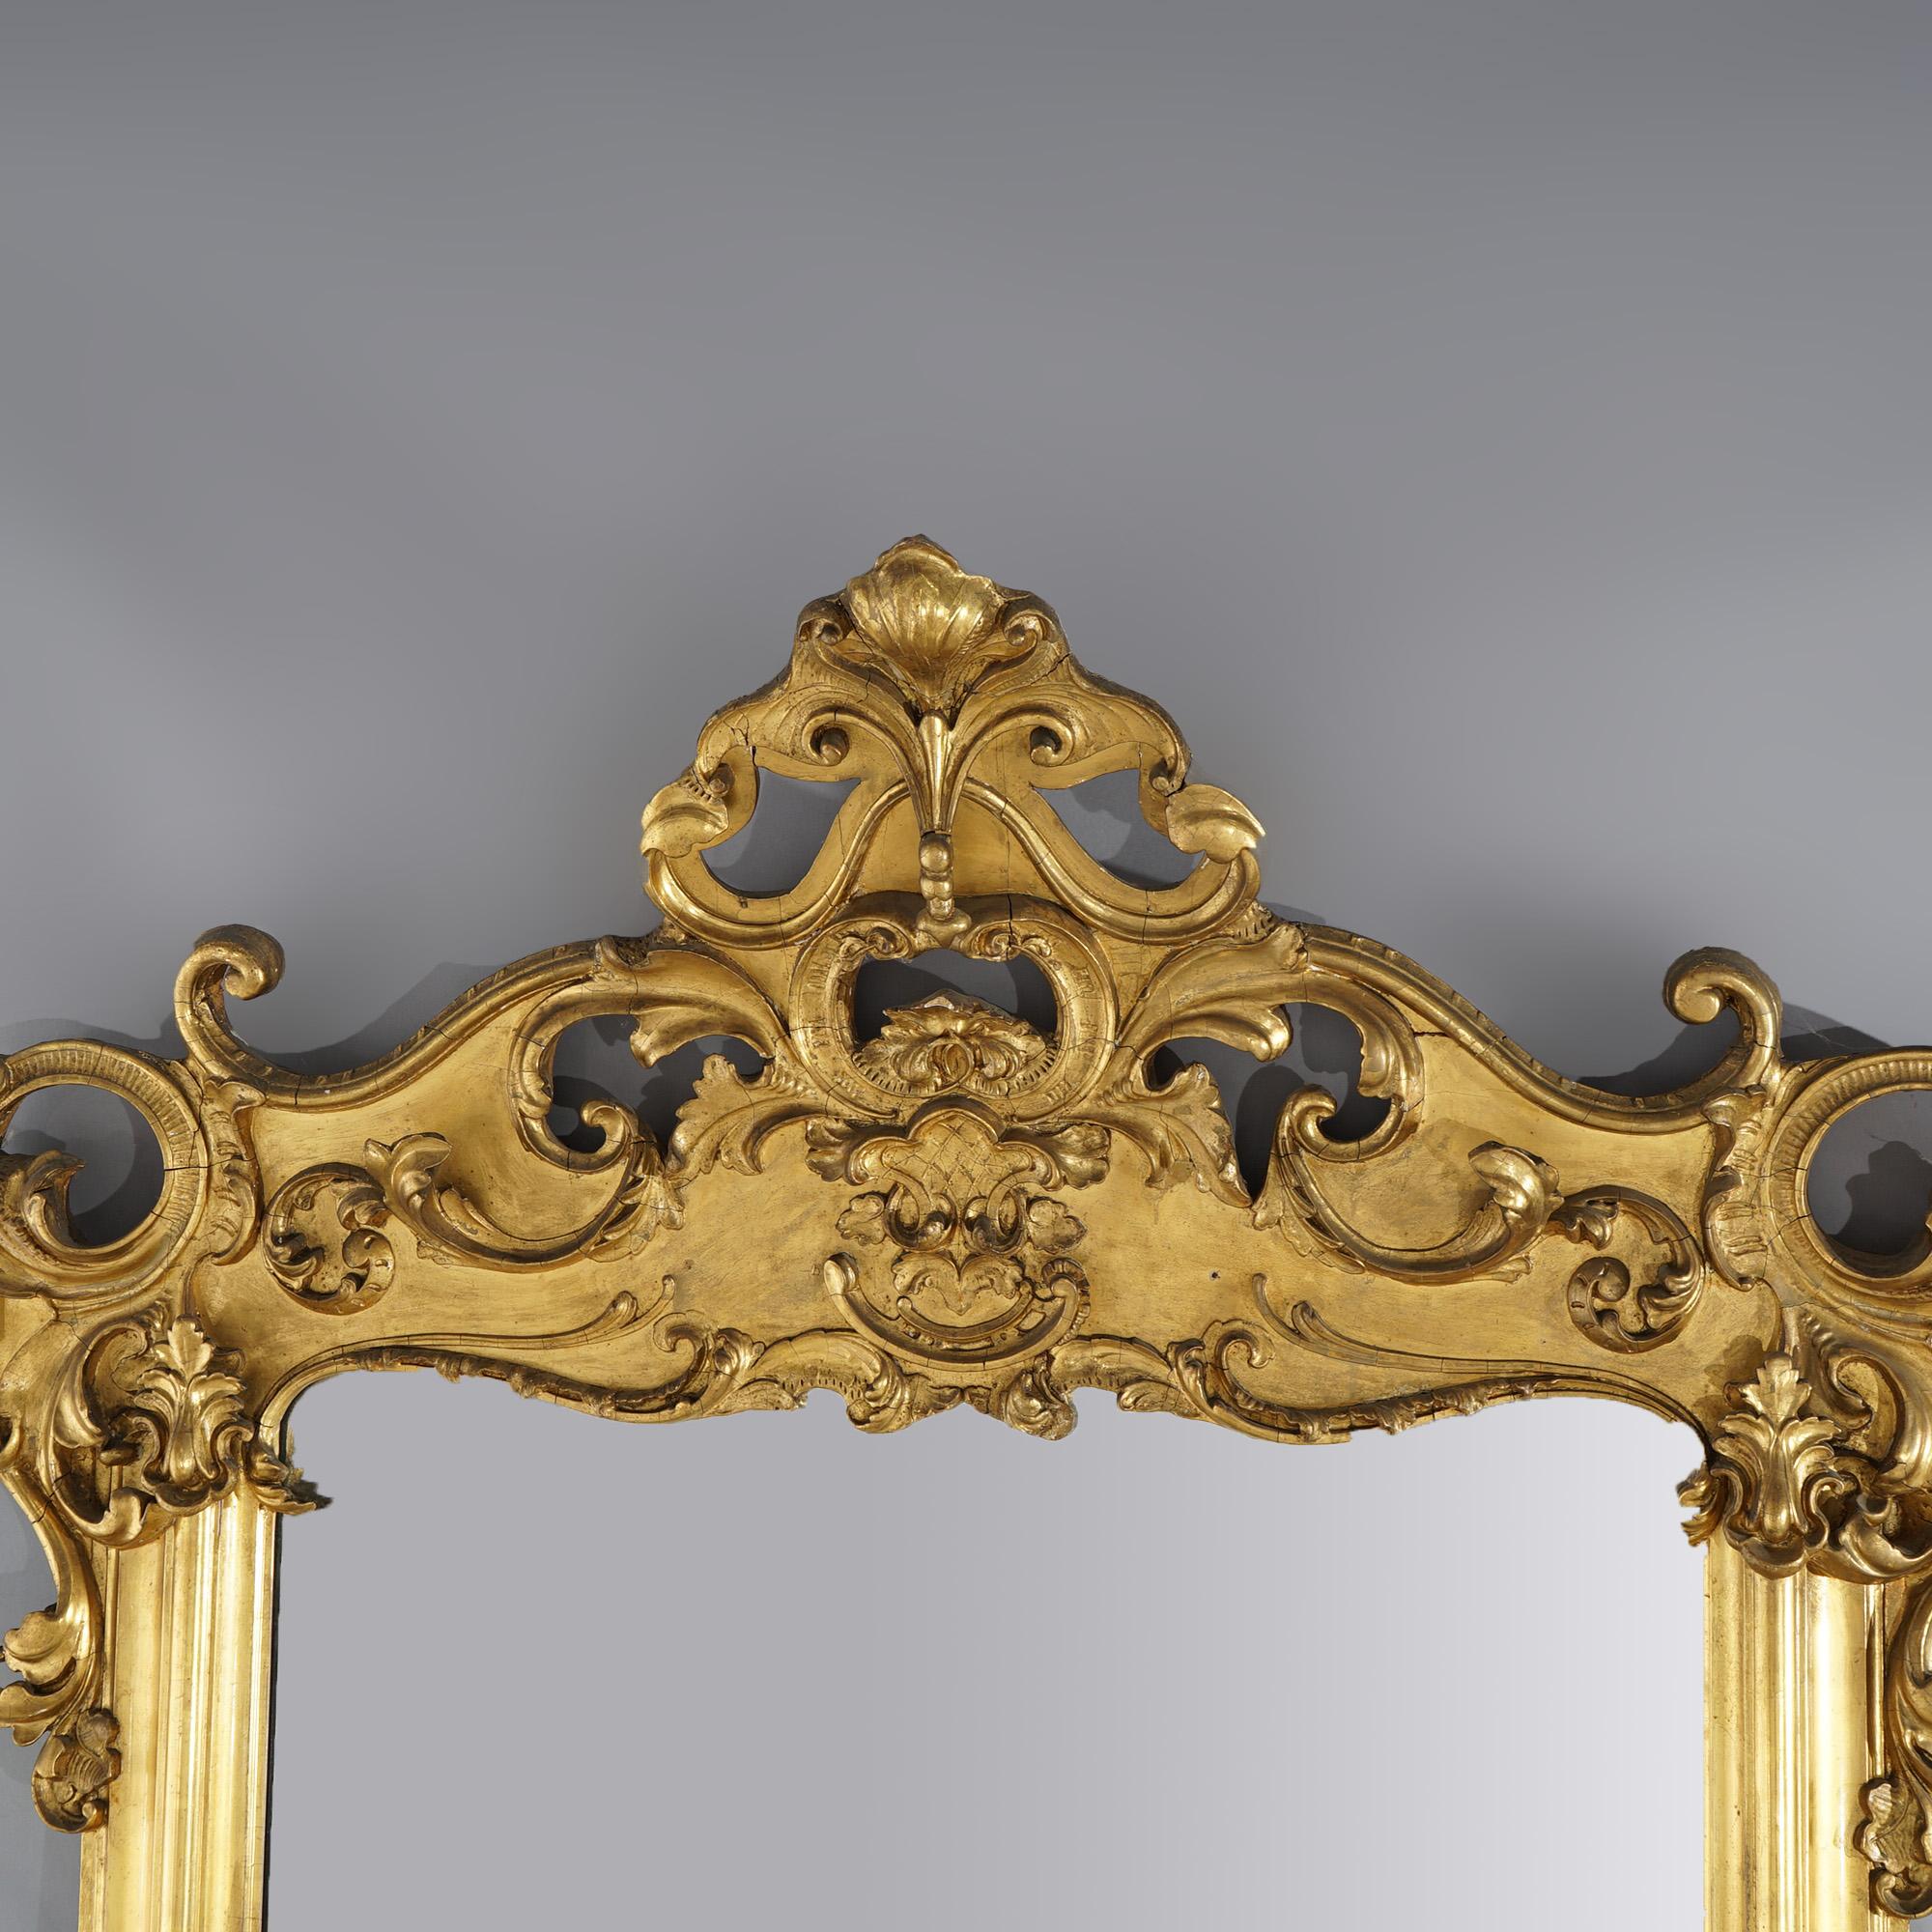 An oversized antique French Victorian over mantle mirror offers carved giltwood frame with exaggerated scroll and foliate crest having central cartouche, c1880

Measures- 71''H x 54''W x 12''D; 50'' x 36.5'' sight

Catalogue Note: Ask about